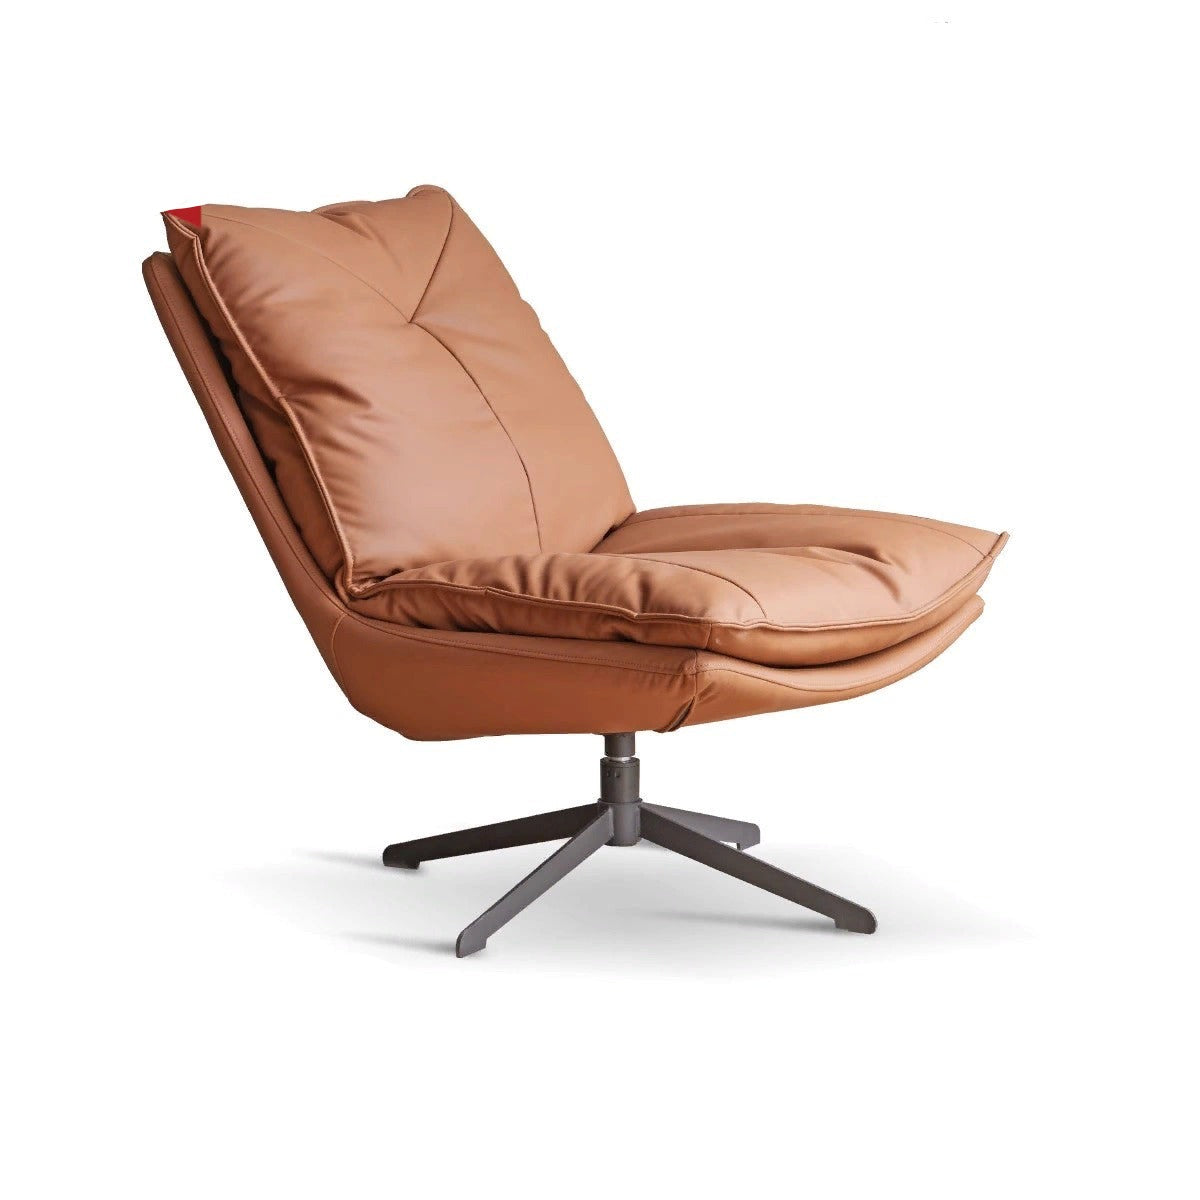 360° Organic Leather Recliner"-